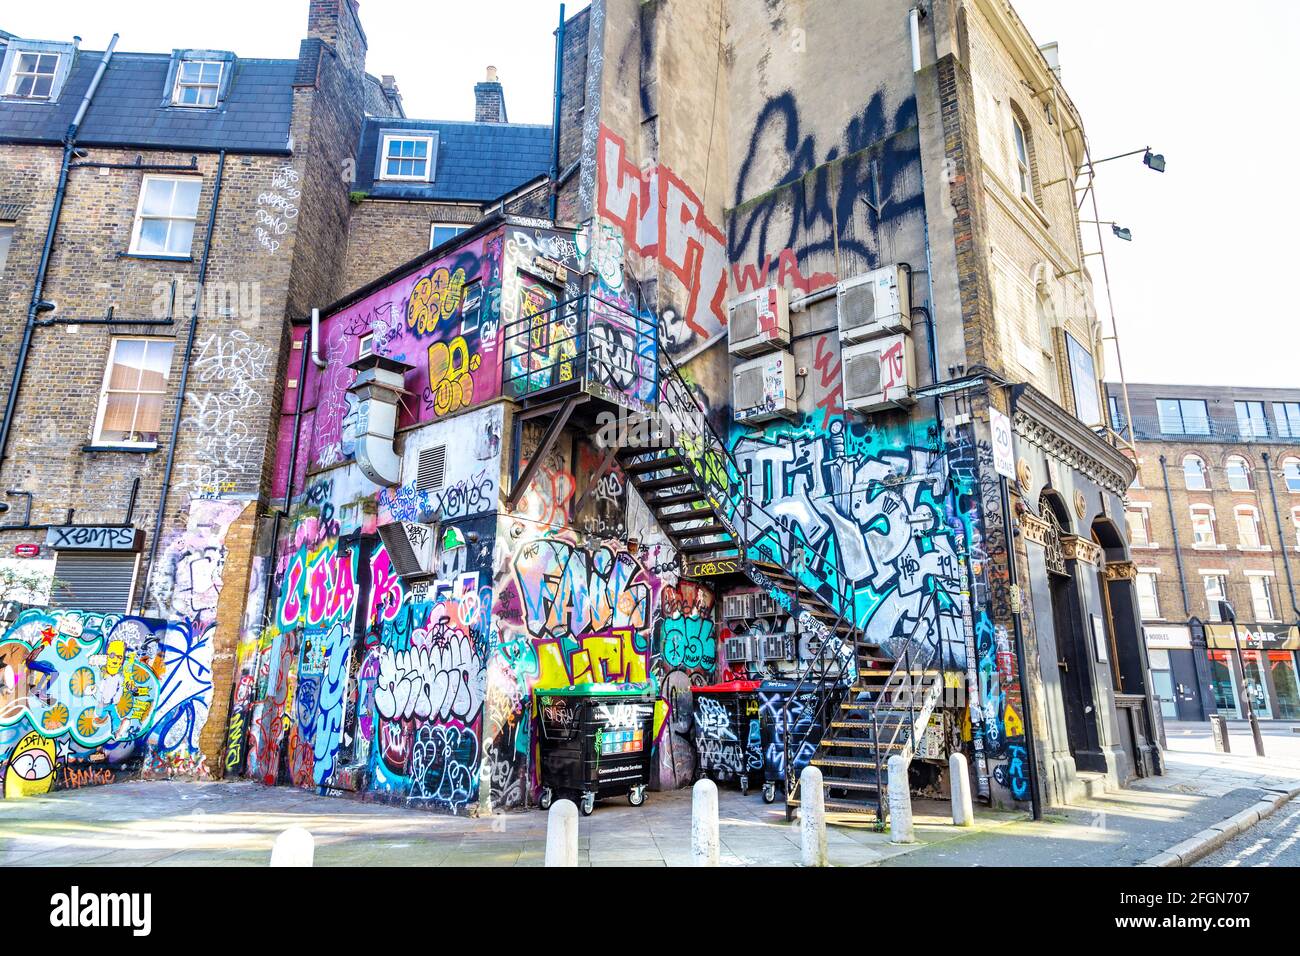 Back of a building covered with graffiti, street art, tags and murals on New Inn Yard, Shoreditch, London, UK Stock Photo